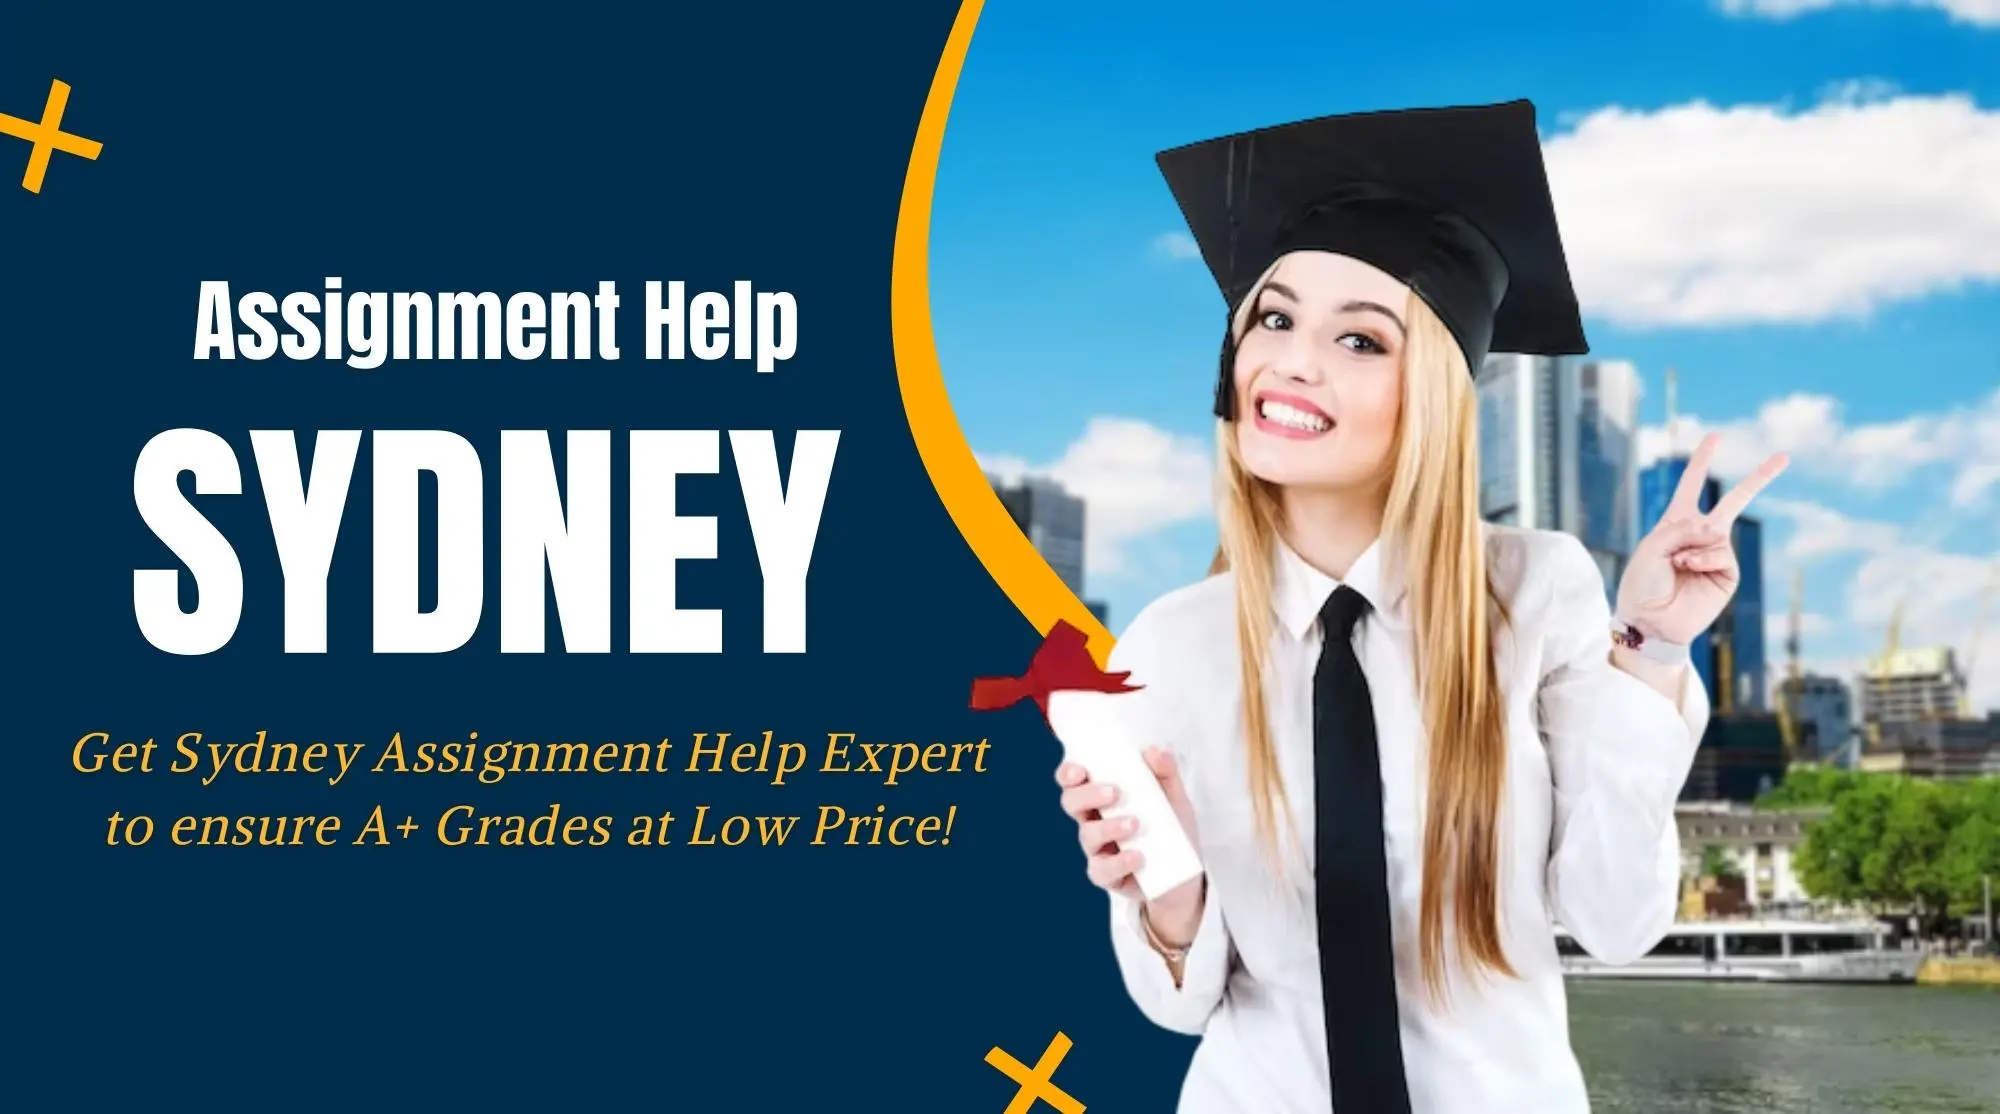 Assignment Help in Sydney by VAH - Ensure A+ Grades at Low Price